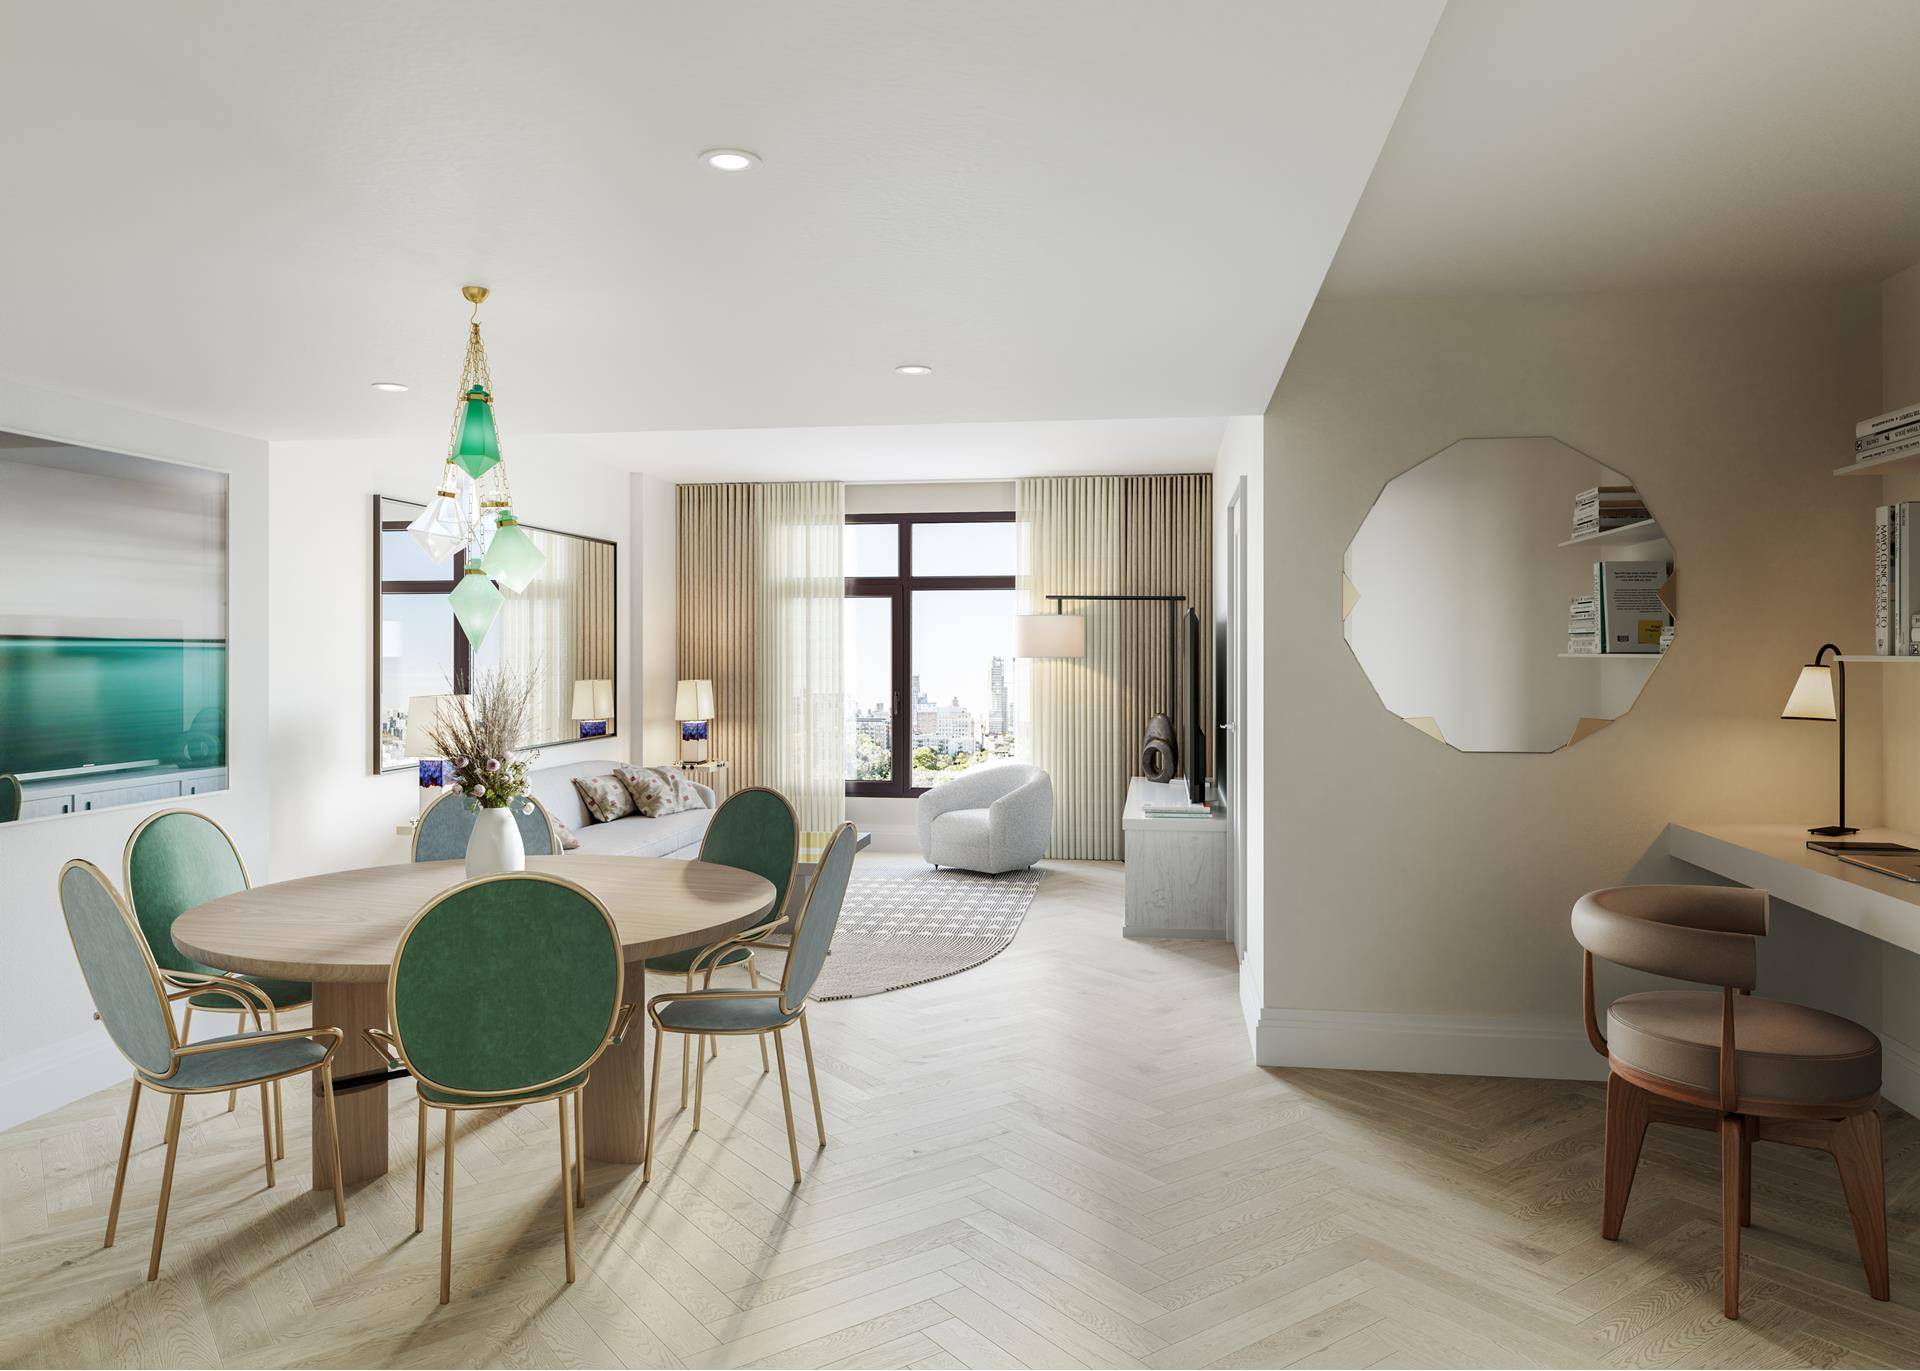 Sales Gallery Now Open By Appointment Introducing residence 4C at 300 West, an east facing one bedroom, one bathroom, offering a spacious living dining area that boasts custom White Oak ...